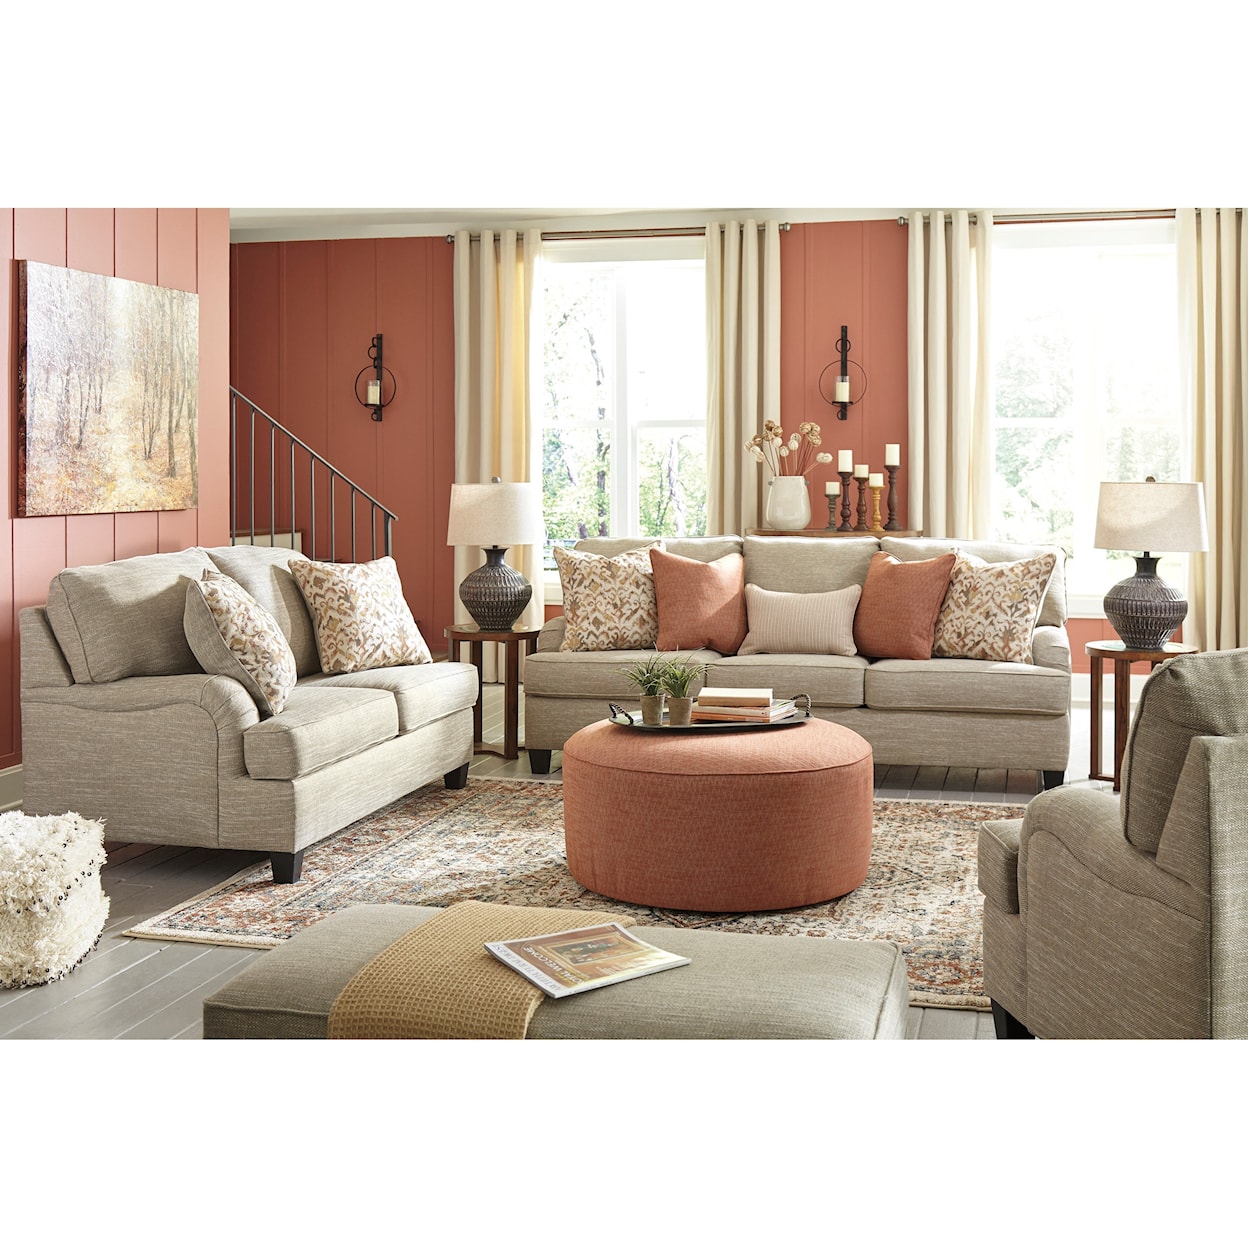 Signature Design by Ashley Almanza Living Room Group